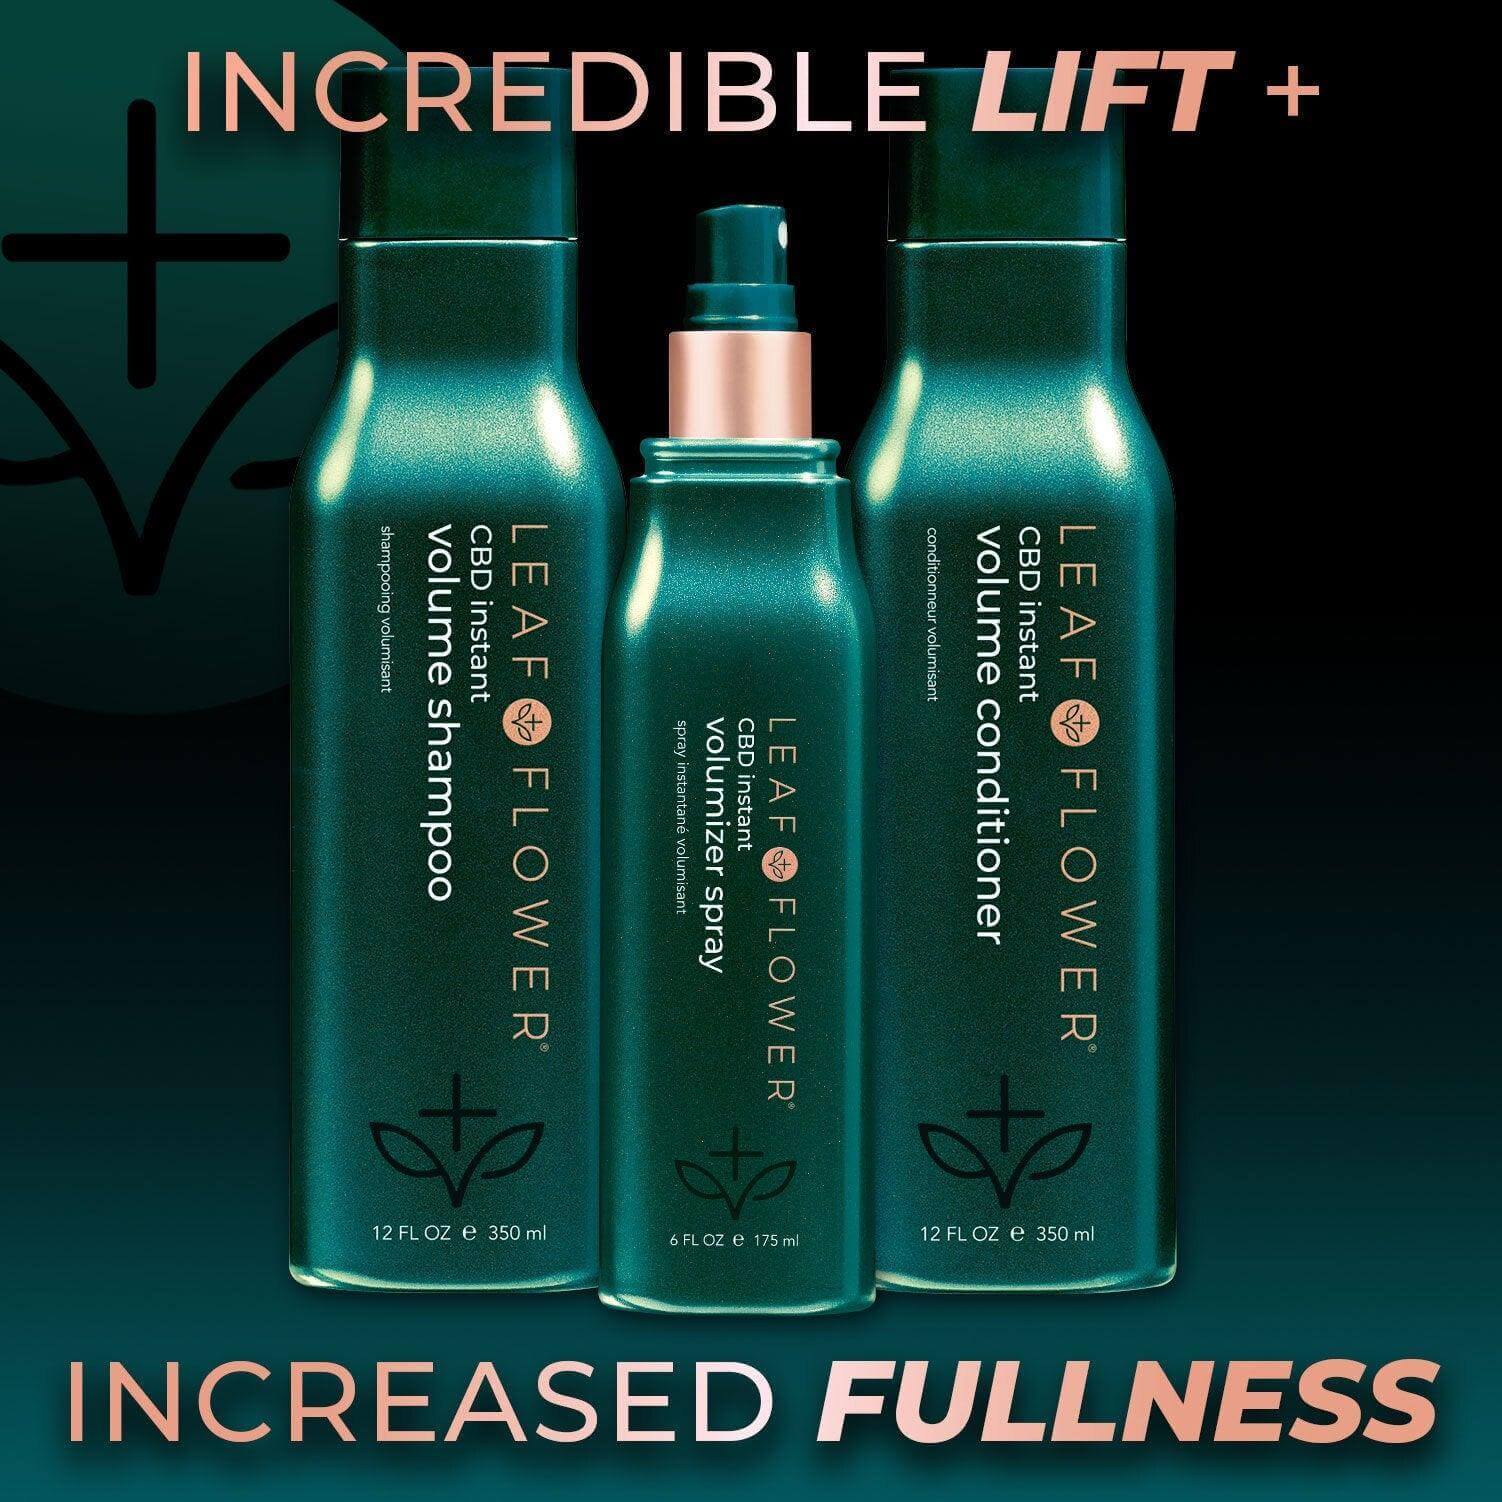 Three green bottles of Leaf and Flower hair care products, formulated with plant-based ingredients and labeled "Incredible Lift + Increased Fullness," feature LEAF and FLOWER Instant Volume Shampoo, volumizer spray, and volume conditioner against a dark background.